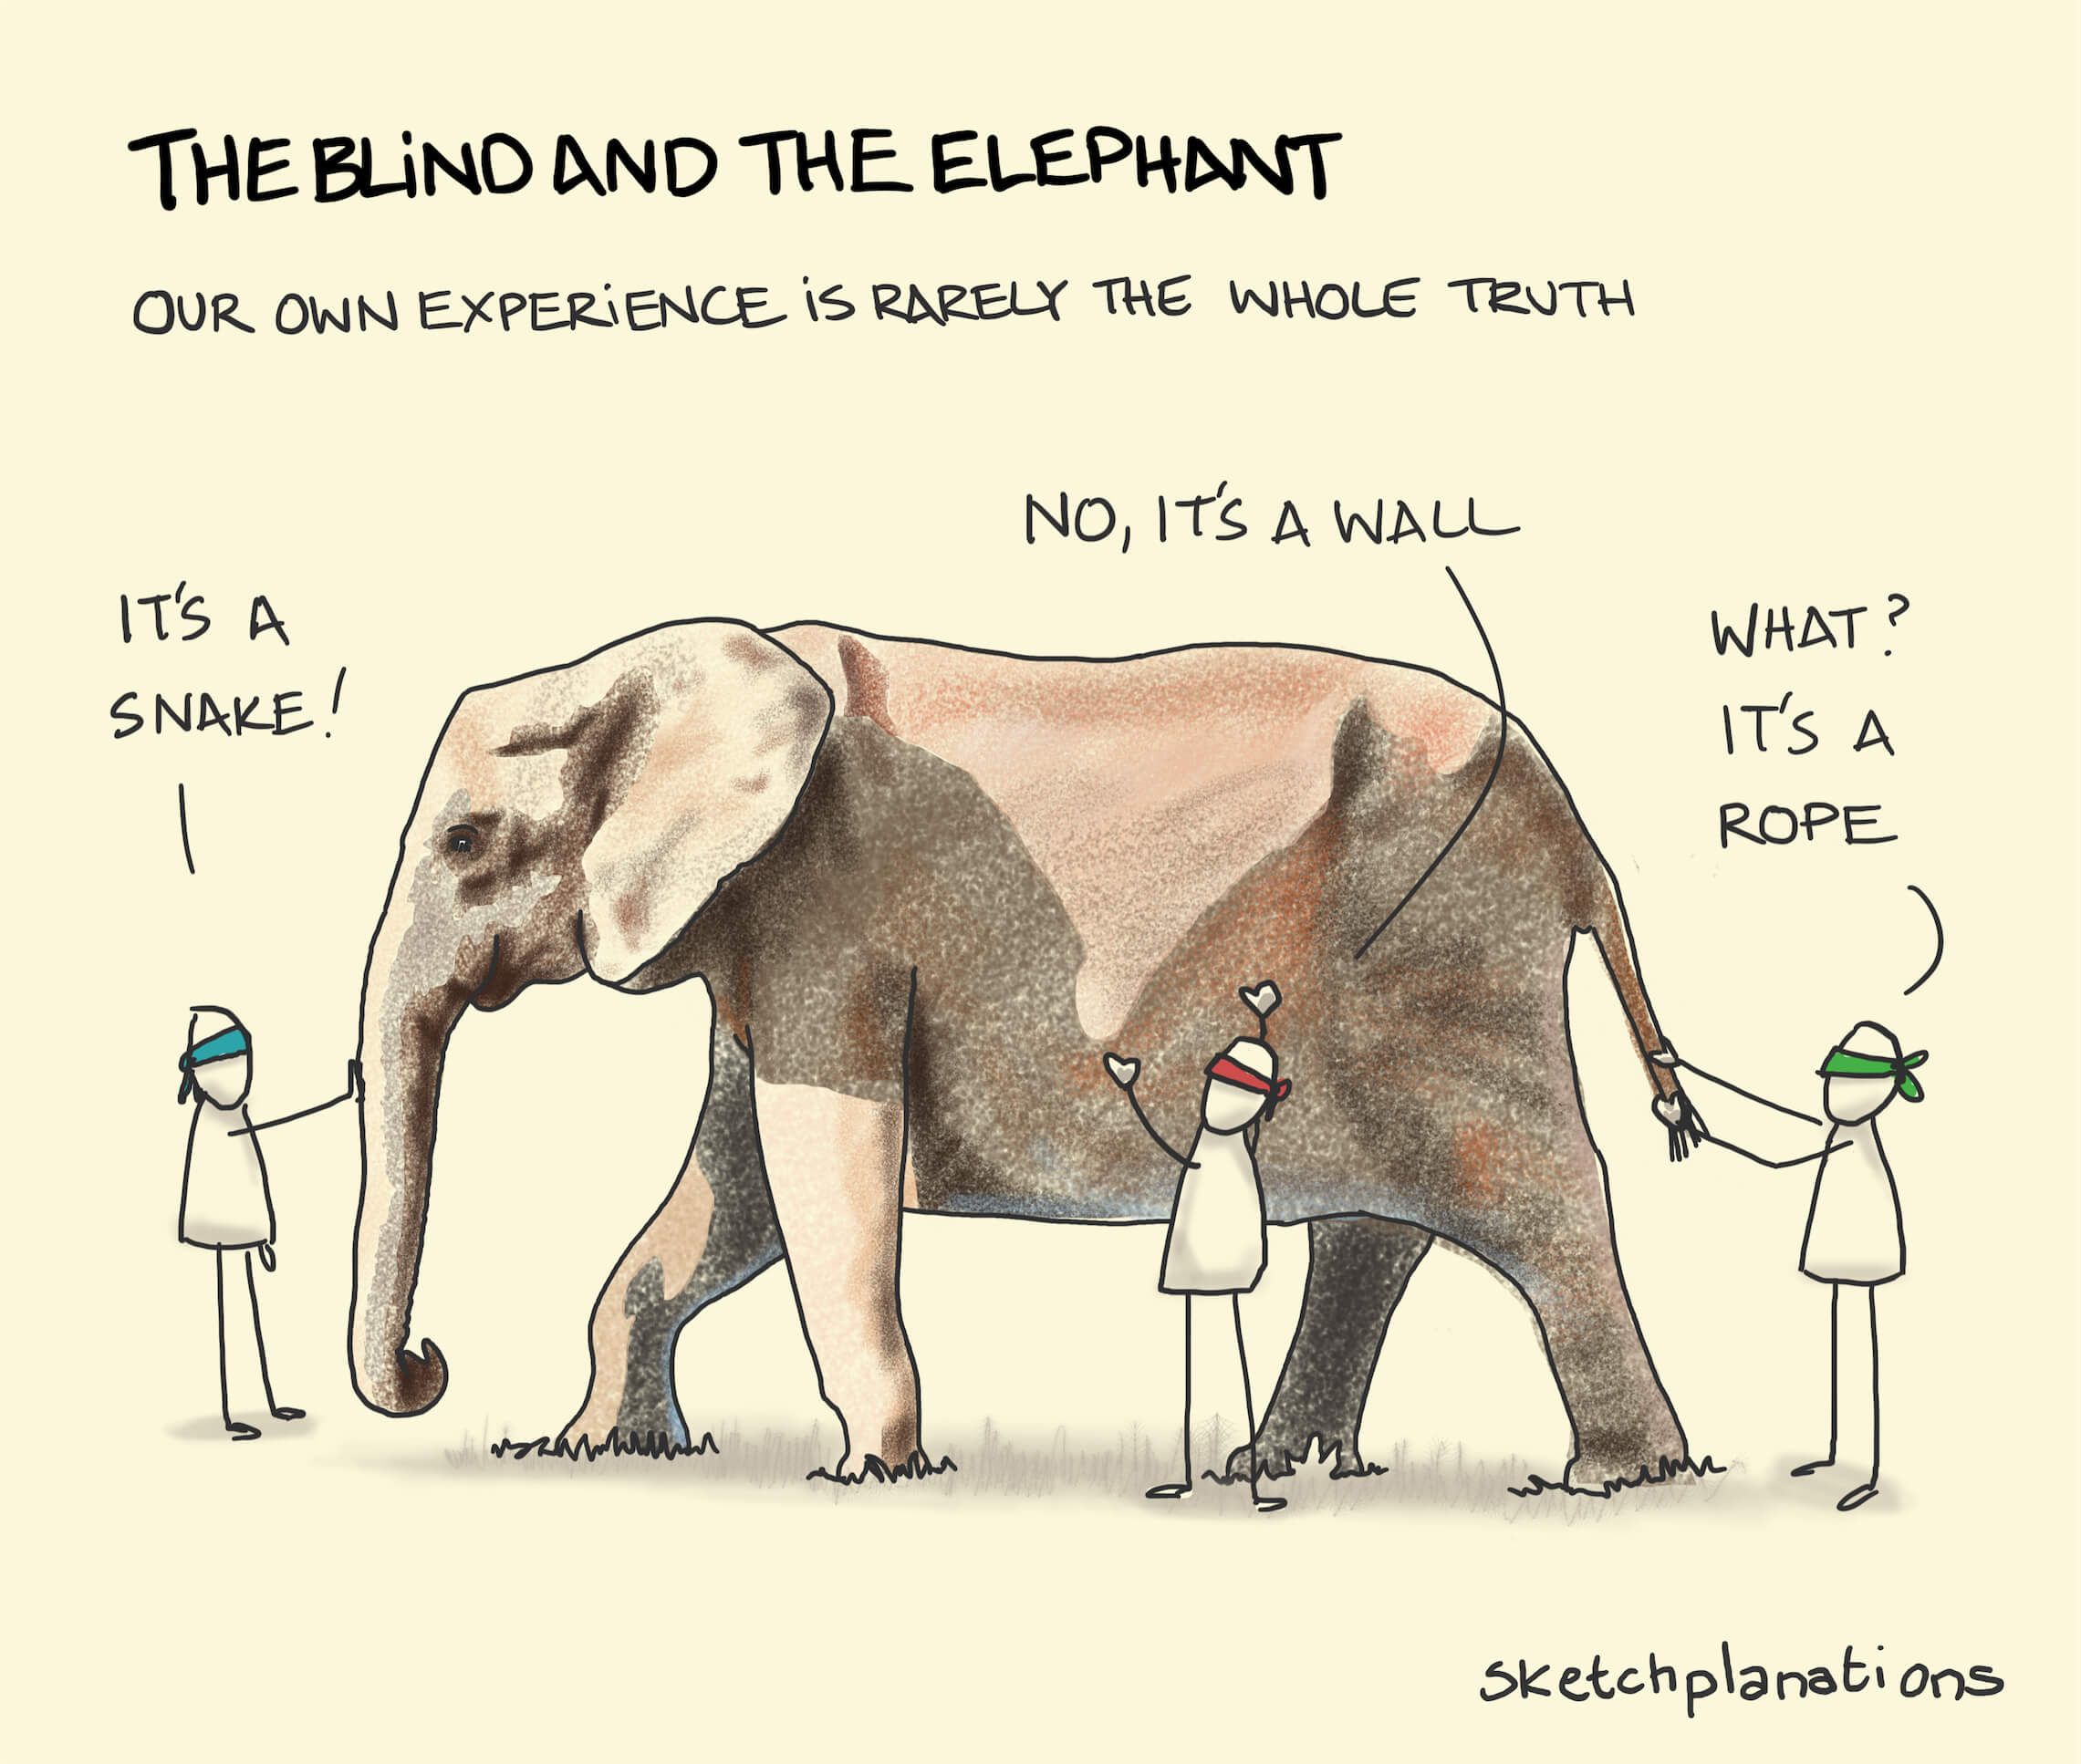 The blind and the Elephant